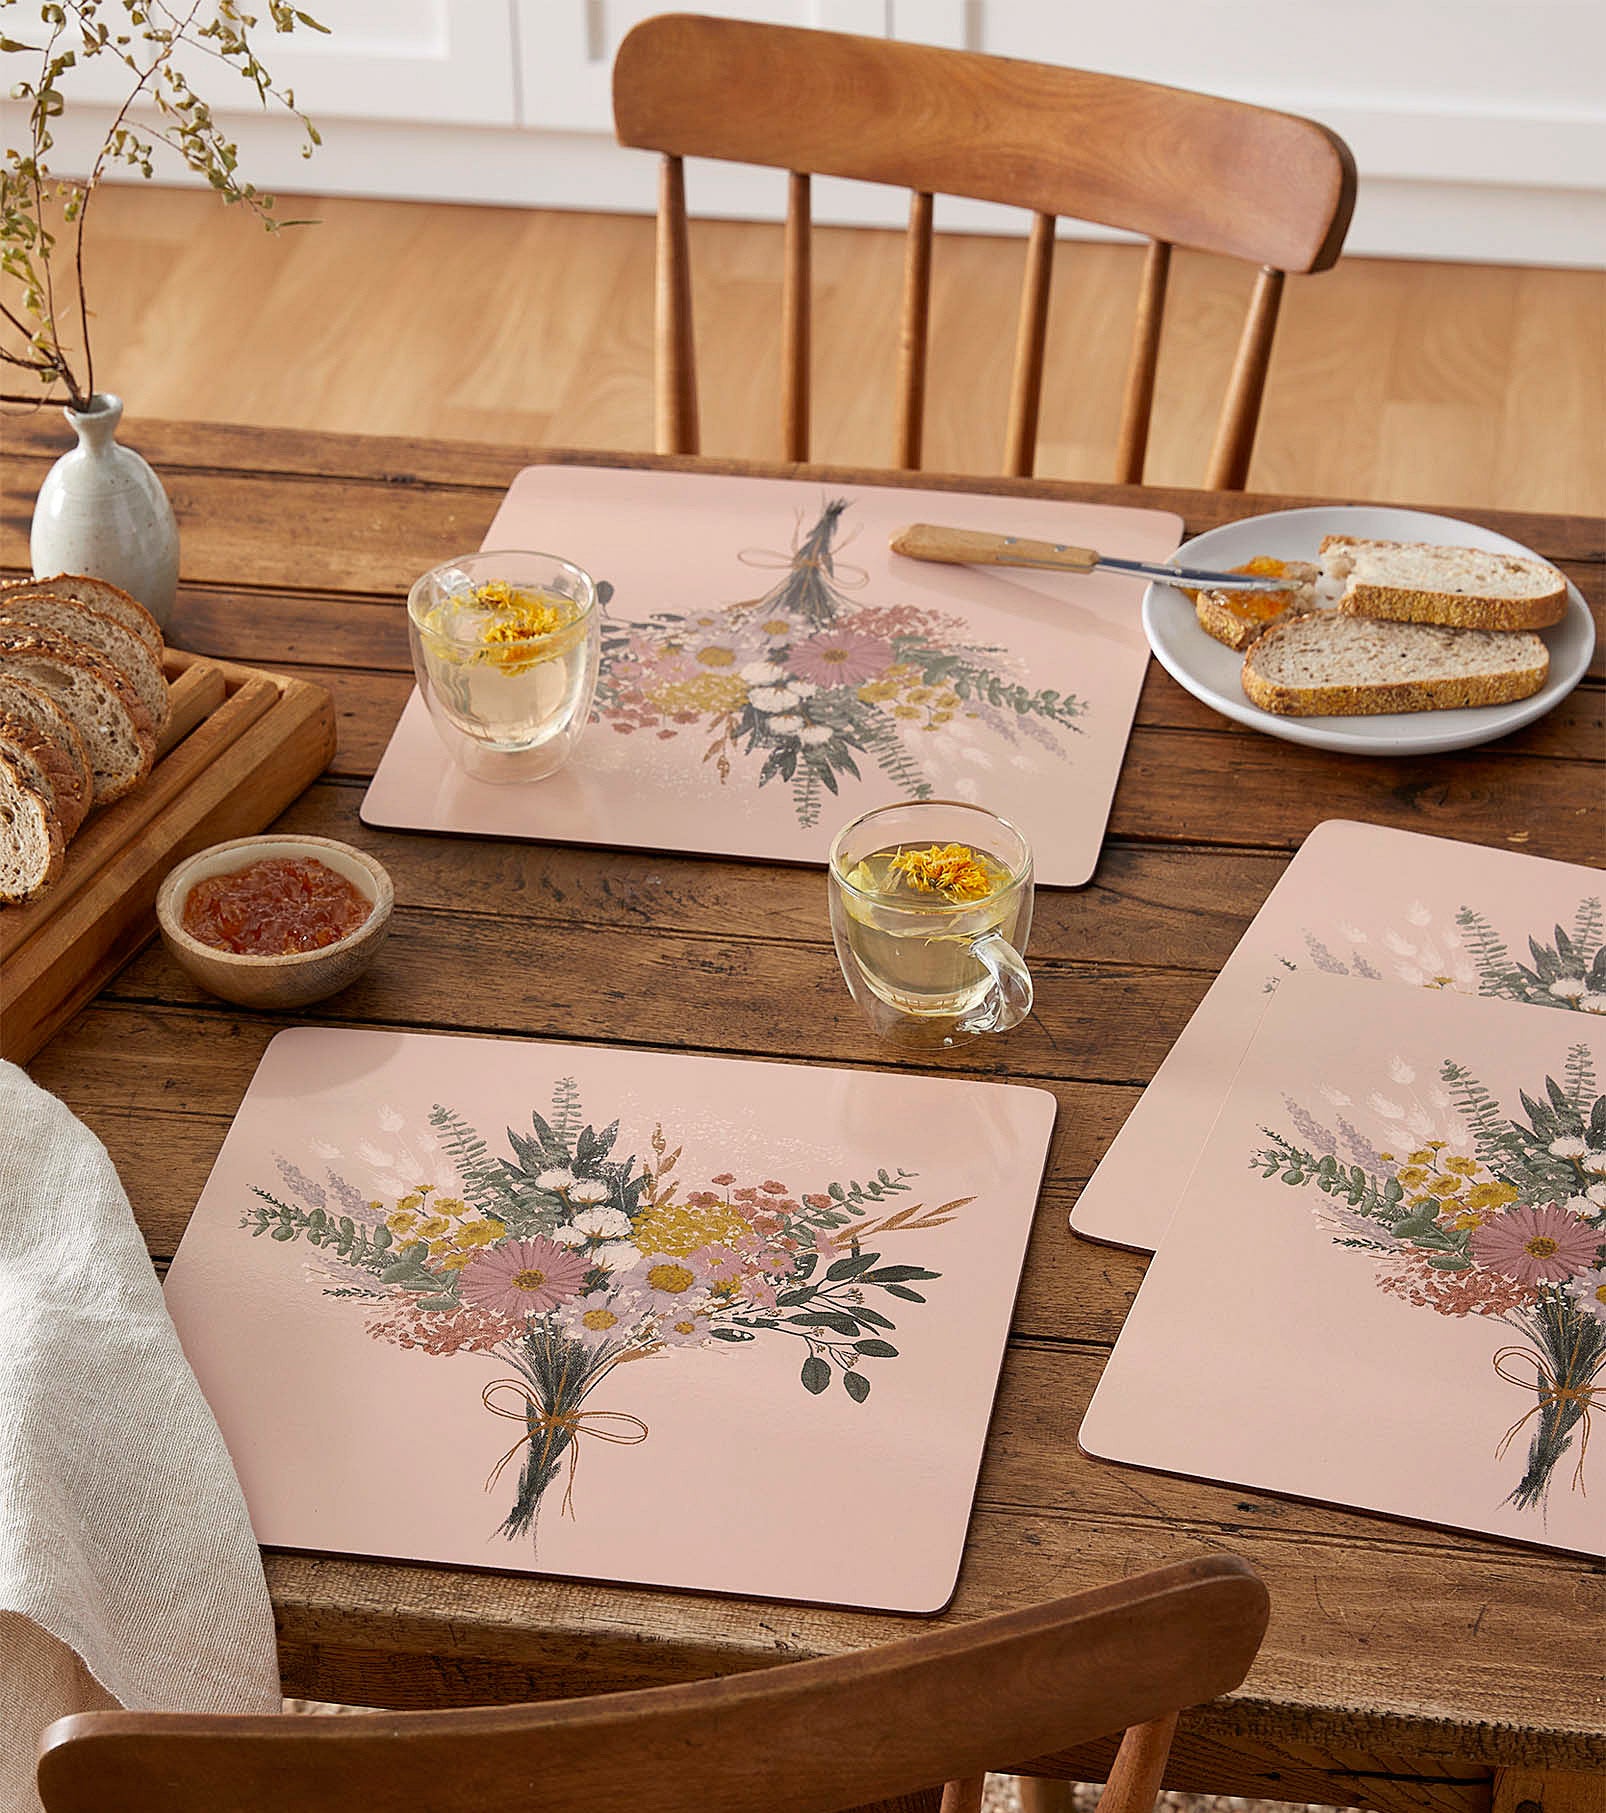 Four placemats with bouquets of flowers designed on each 